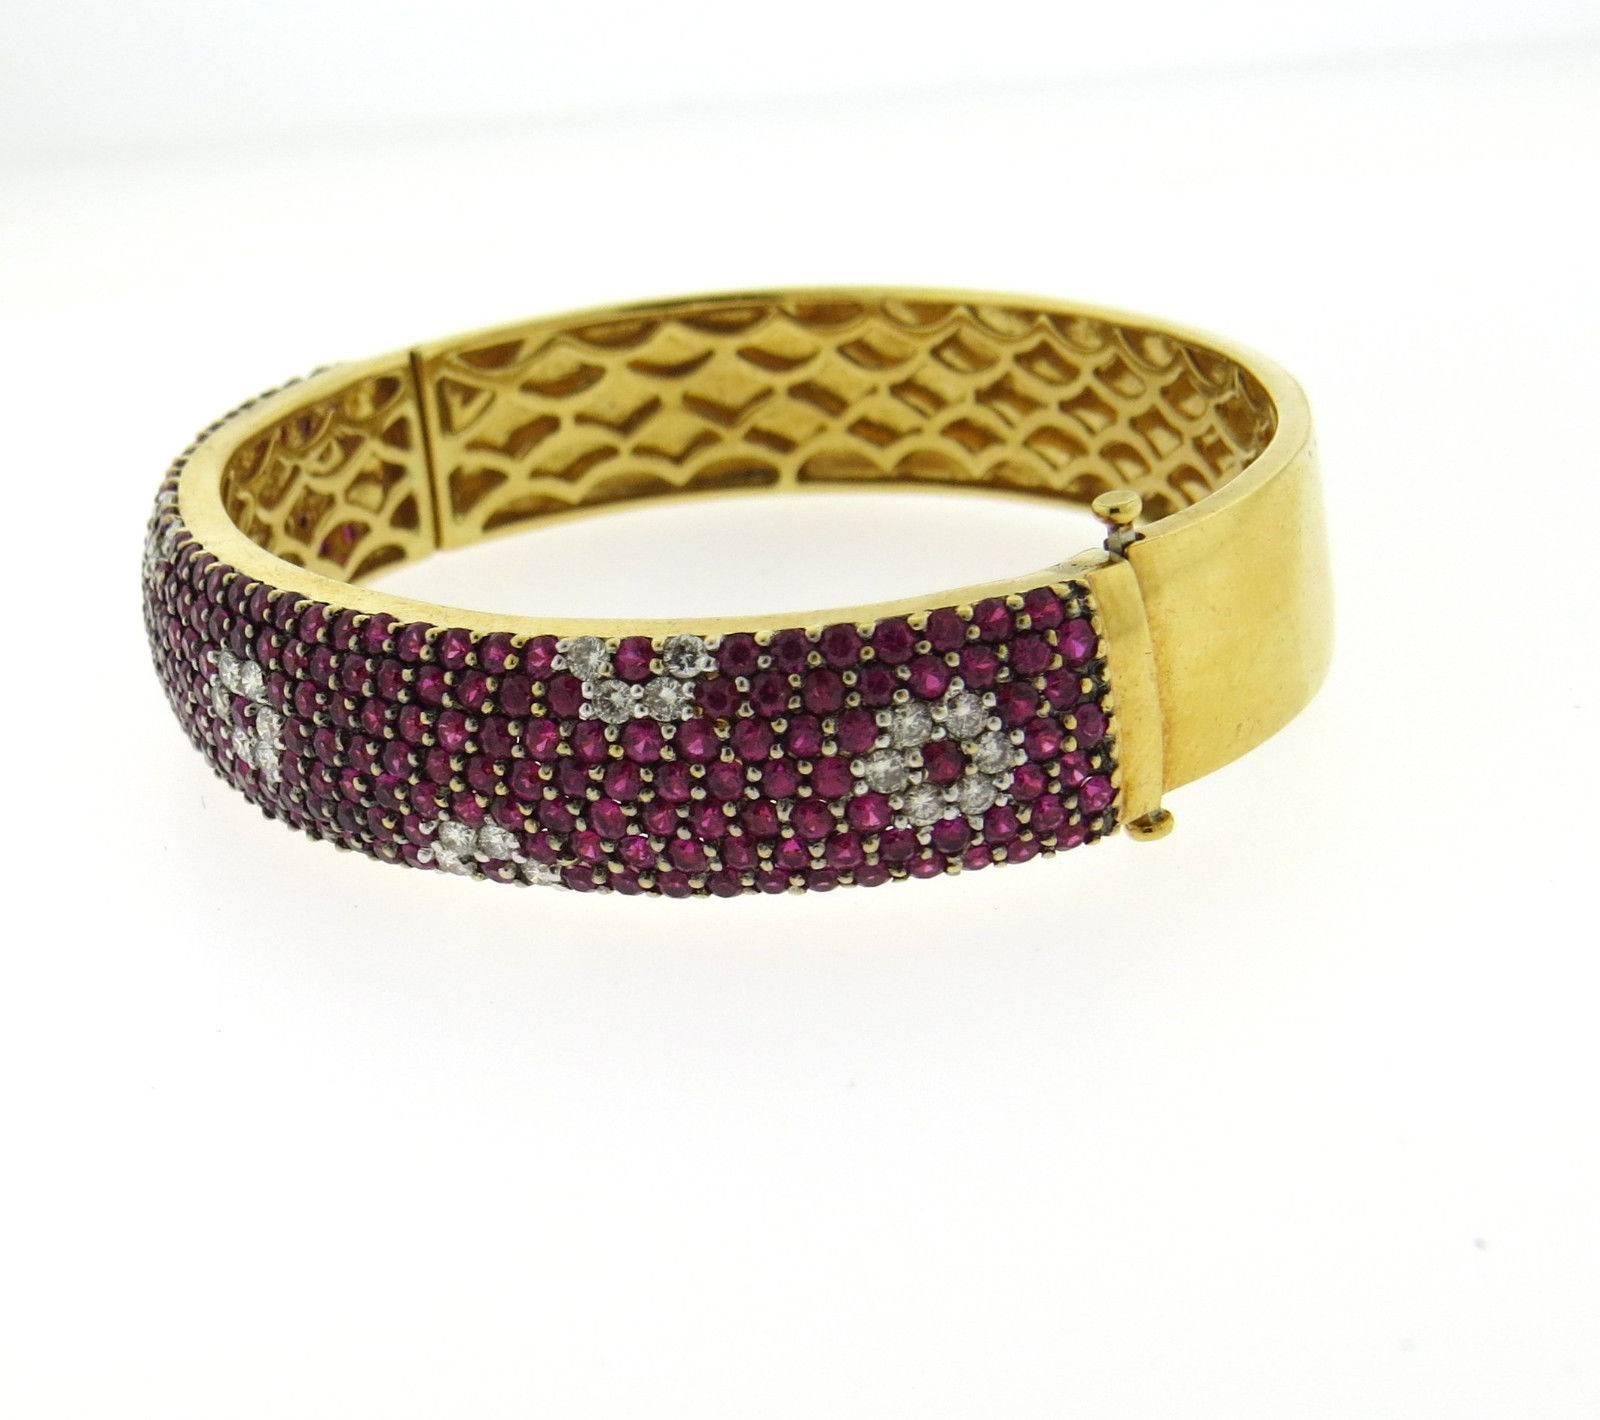 An 18k yellow gold bangle bracelet set with rubies and approximately 0.50ctw of H/VS diamonds.  The bracelet will comfortably fit up to  6 3/4